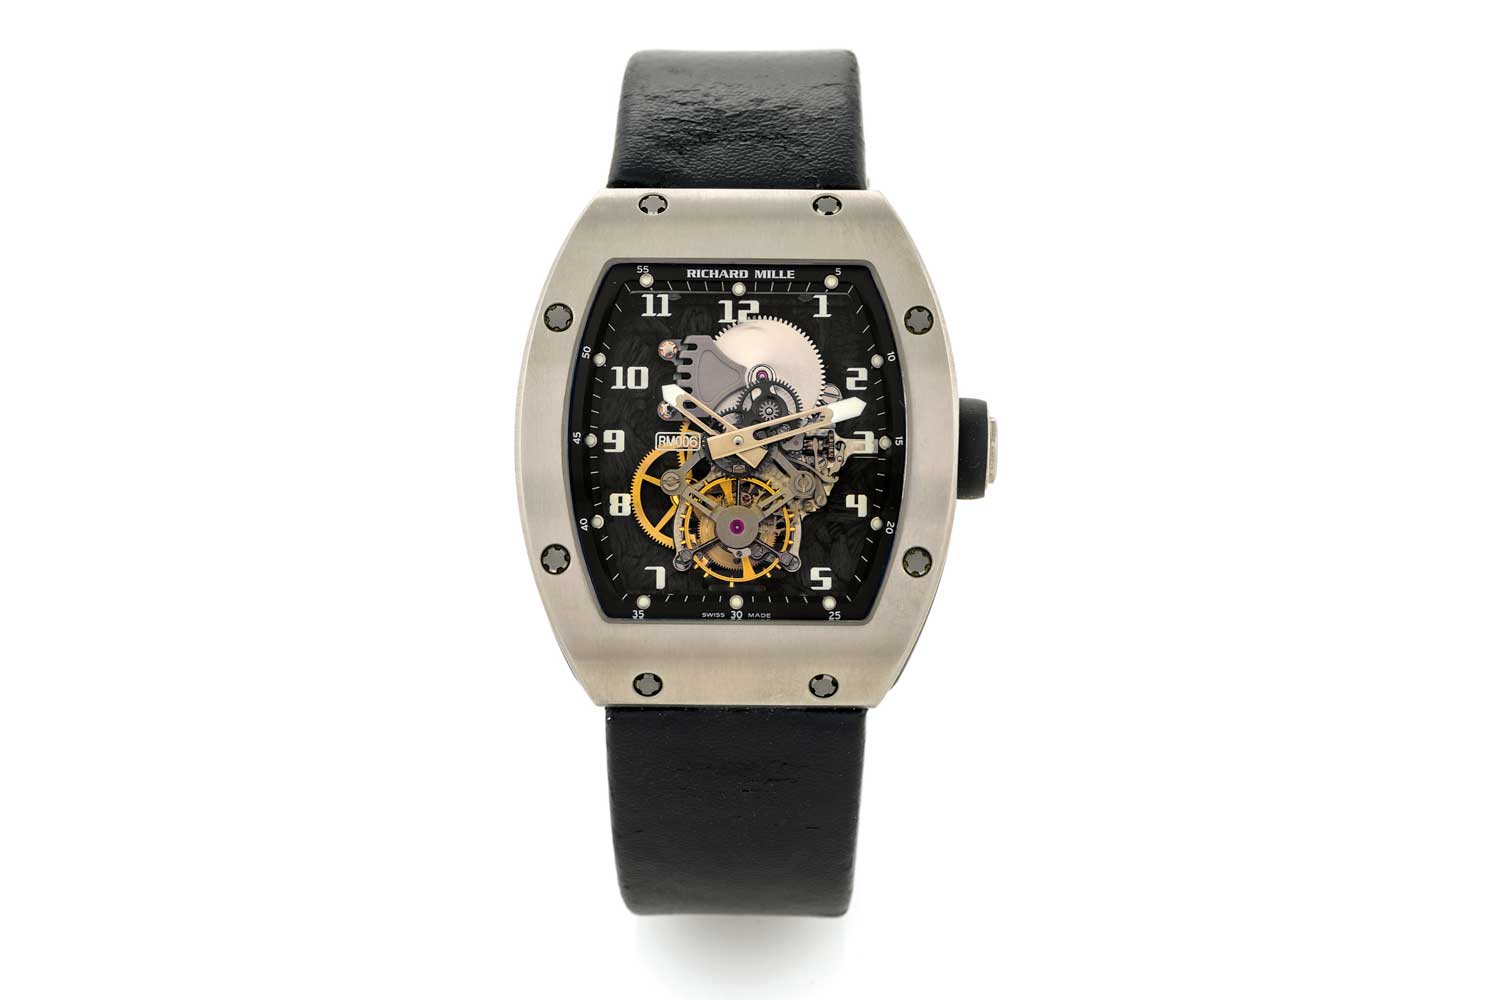 The RM 006, revealed in 2005, was the first wristwatch ever to have its baseplate made of carbon nanofiber (Image: antiquorum.com)